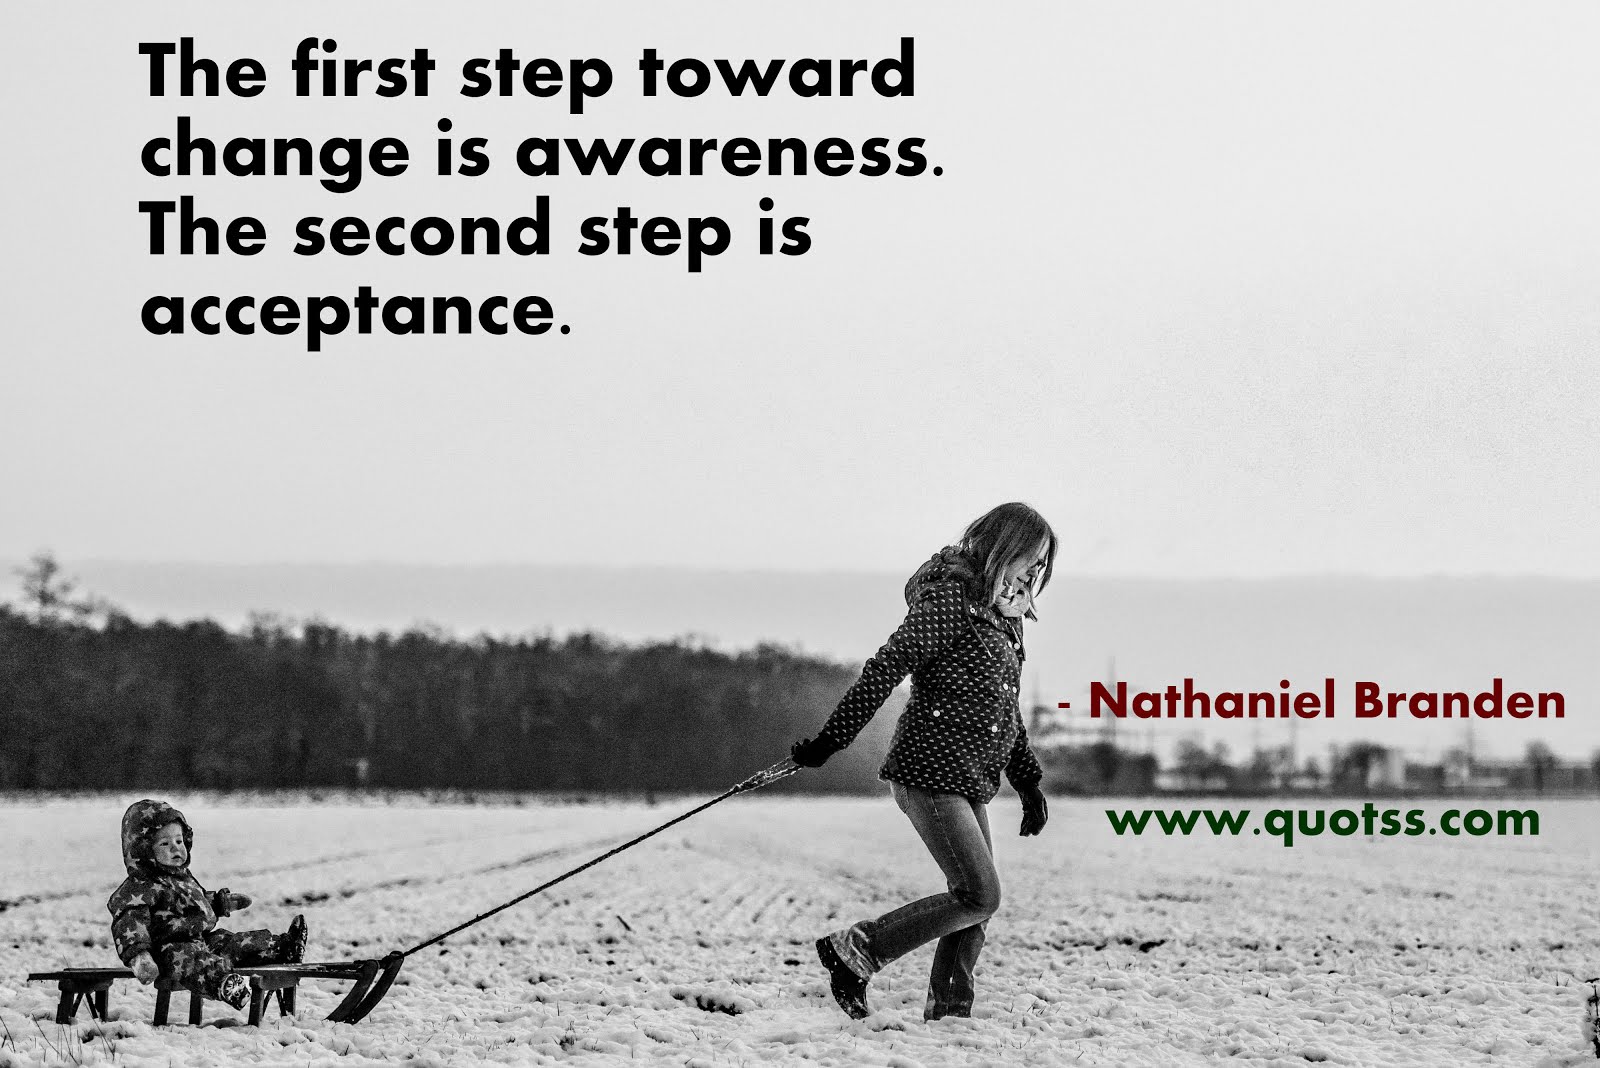 Nathaniel Branden Quote on Quotss